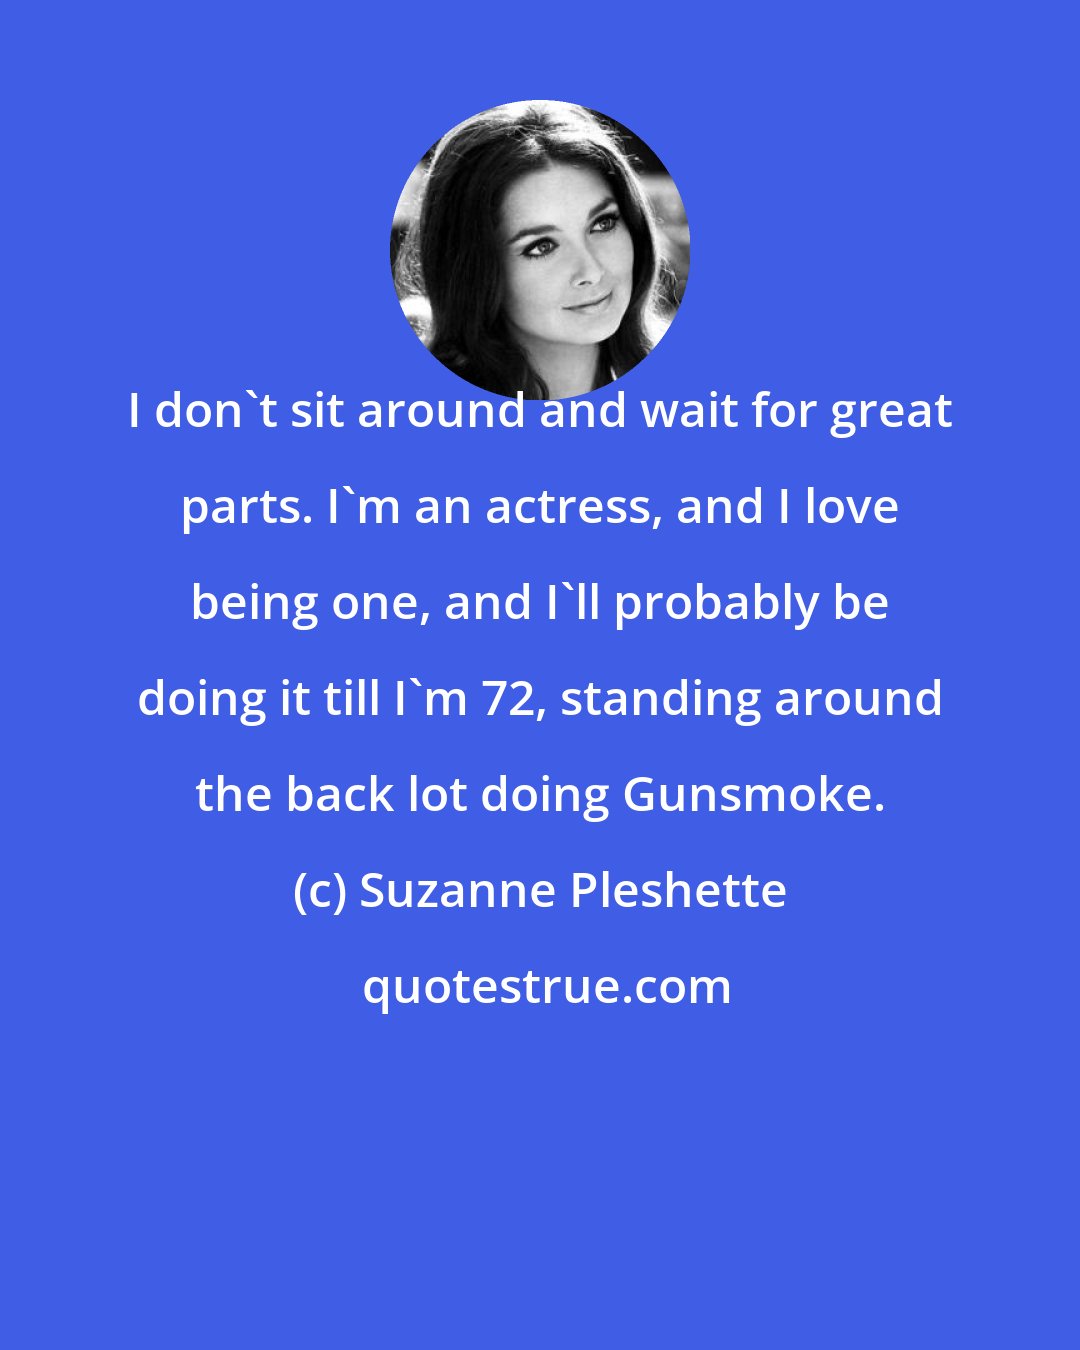 Suzanne Pleshette: I don't sit around and wait for great parts. I'm an actress, and I love being one, and I'll probably be doing it till I'm 72, standing around the back lot doing Gunsmoke.